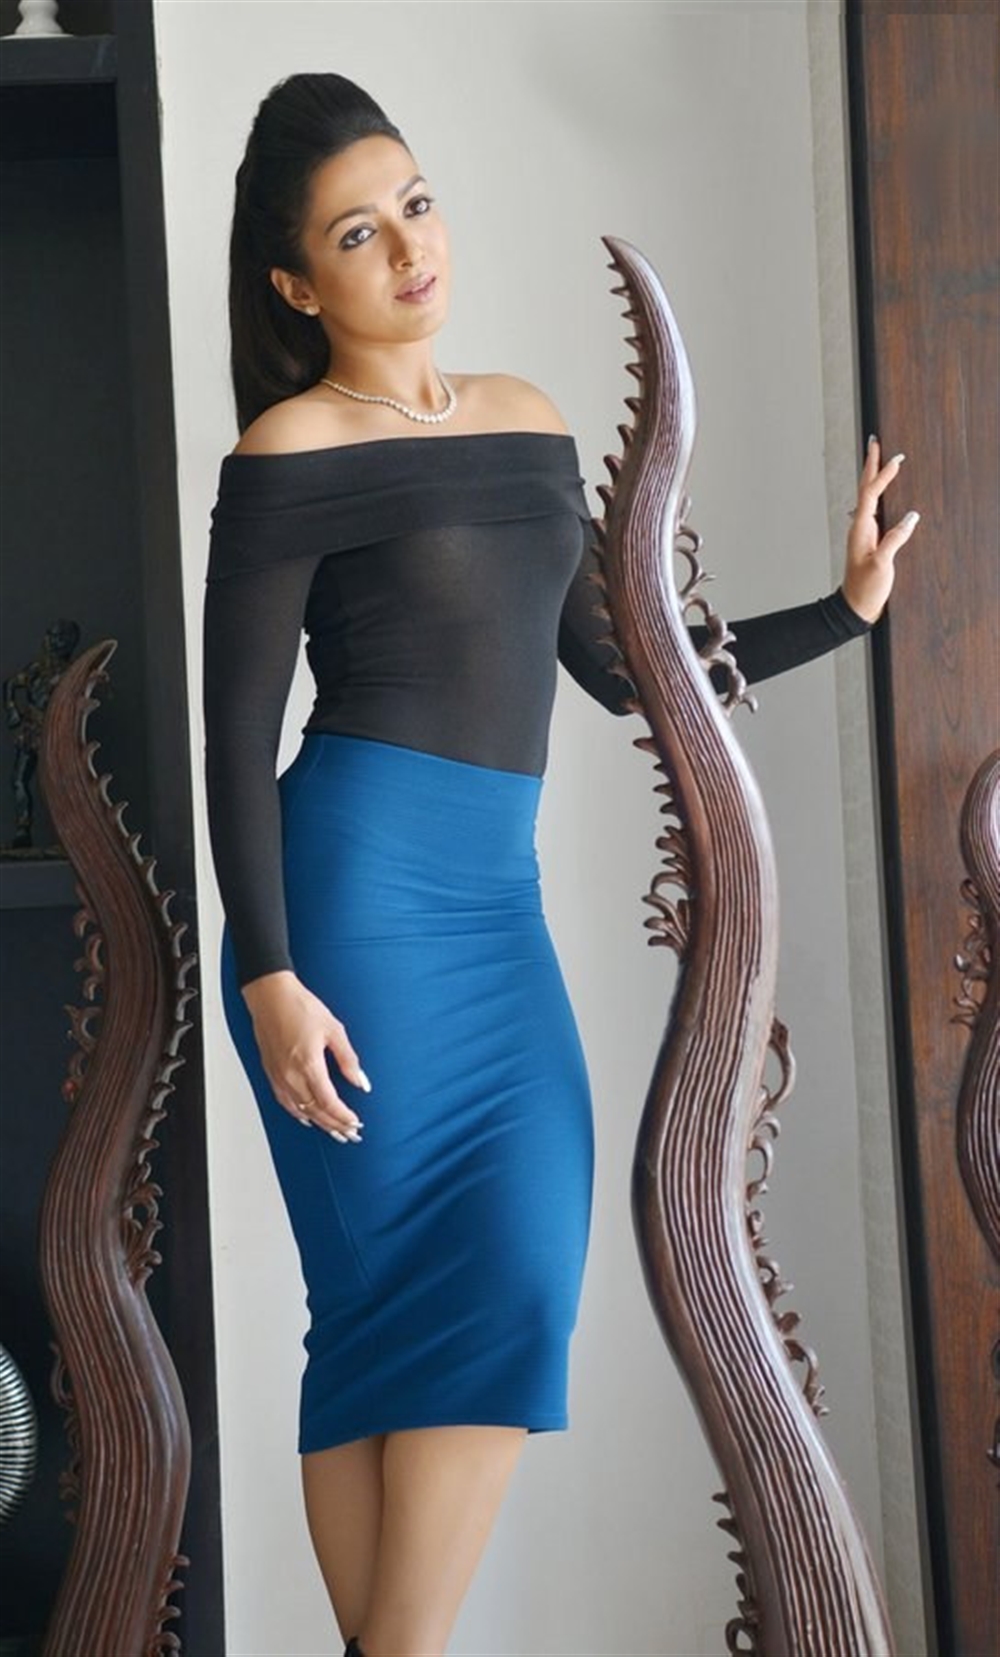 Catherine Tresa New Hot Pictures In Tight Outfit Dress New Movie Posters 